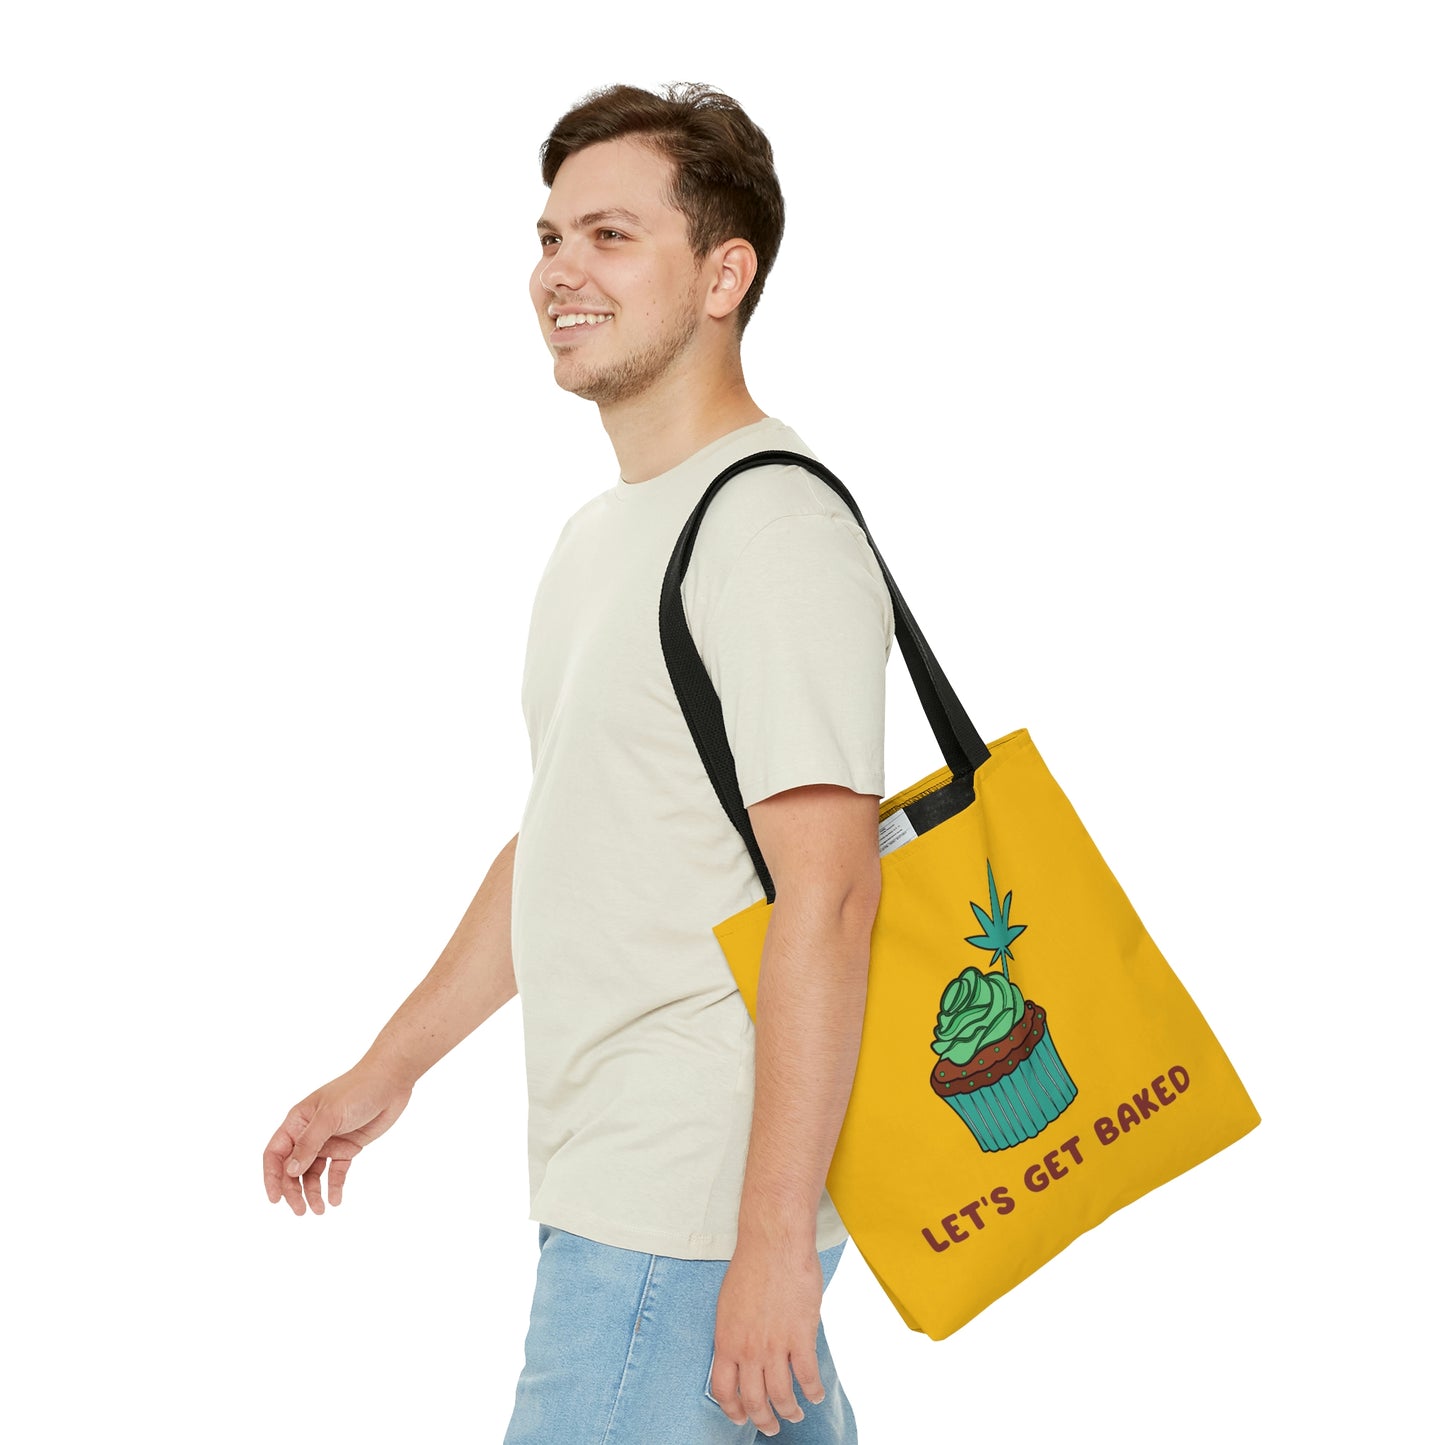 A man decides to walk while wearing the upbeat Let's Get Baked Yellow Weed Tote Bag